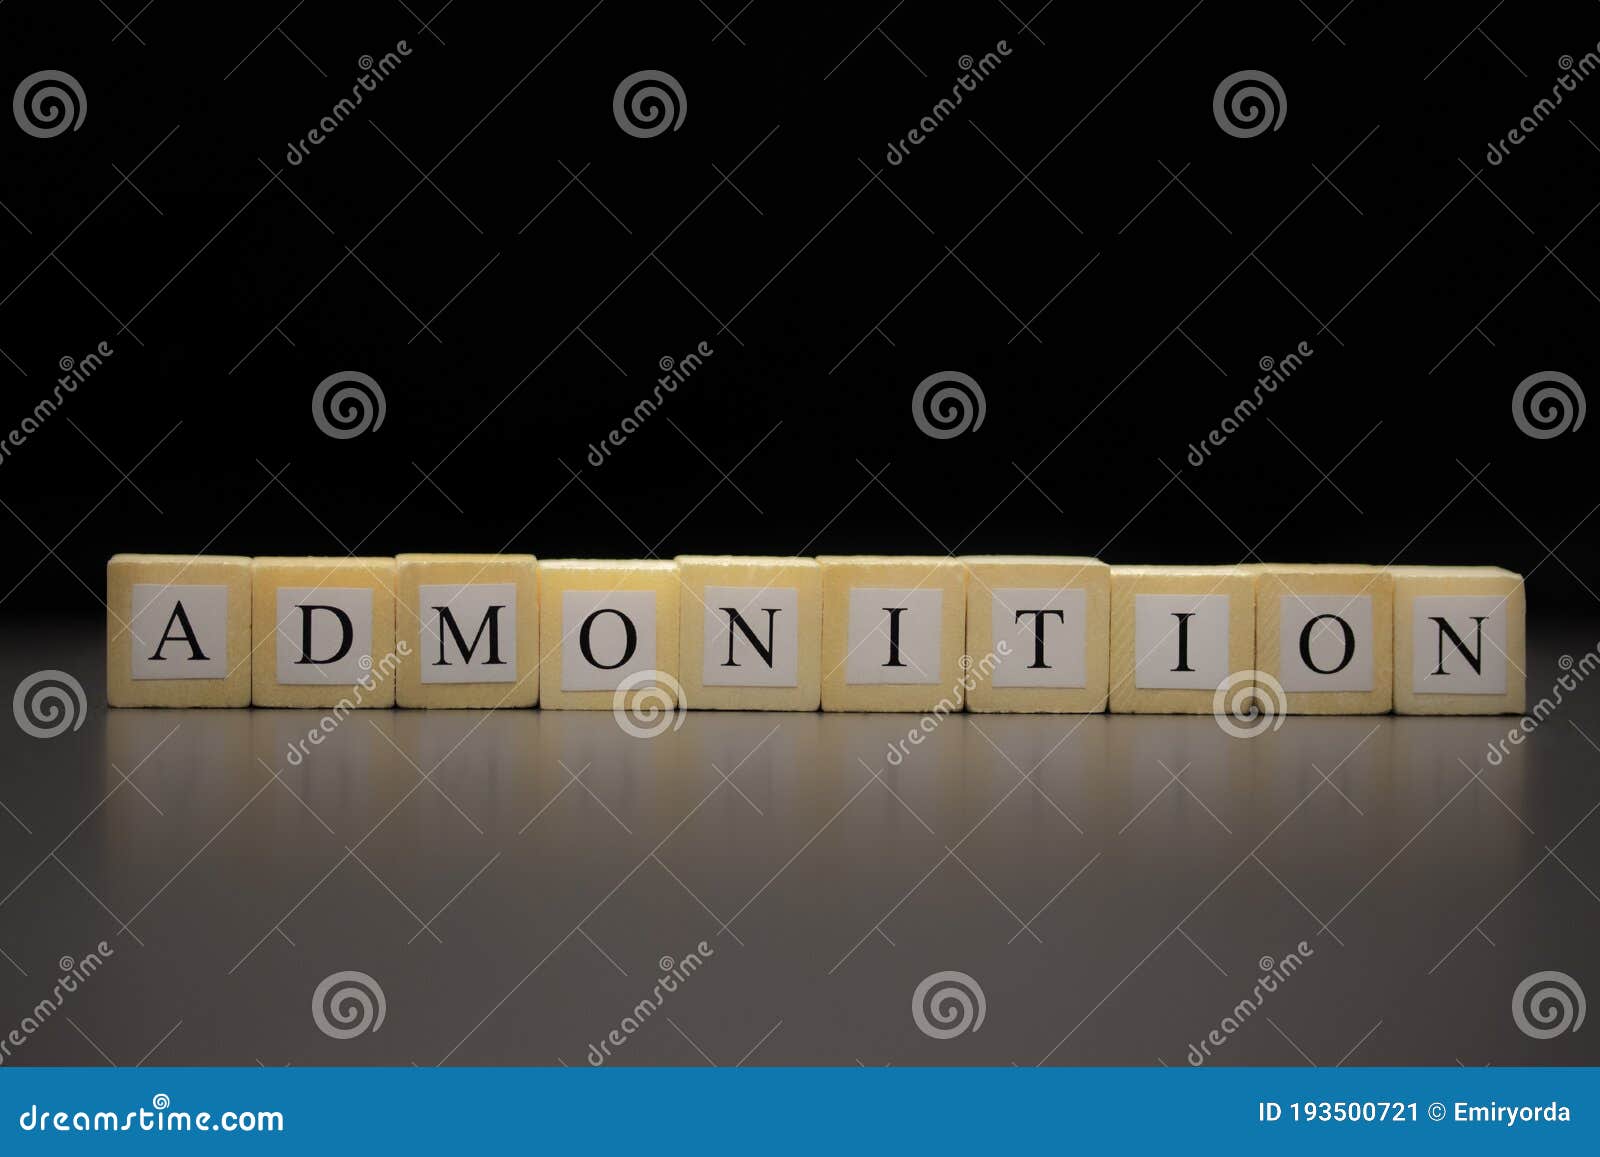 the word admonition written on wooden cubes  on a black background